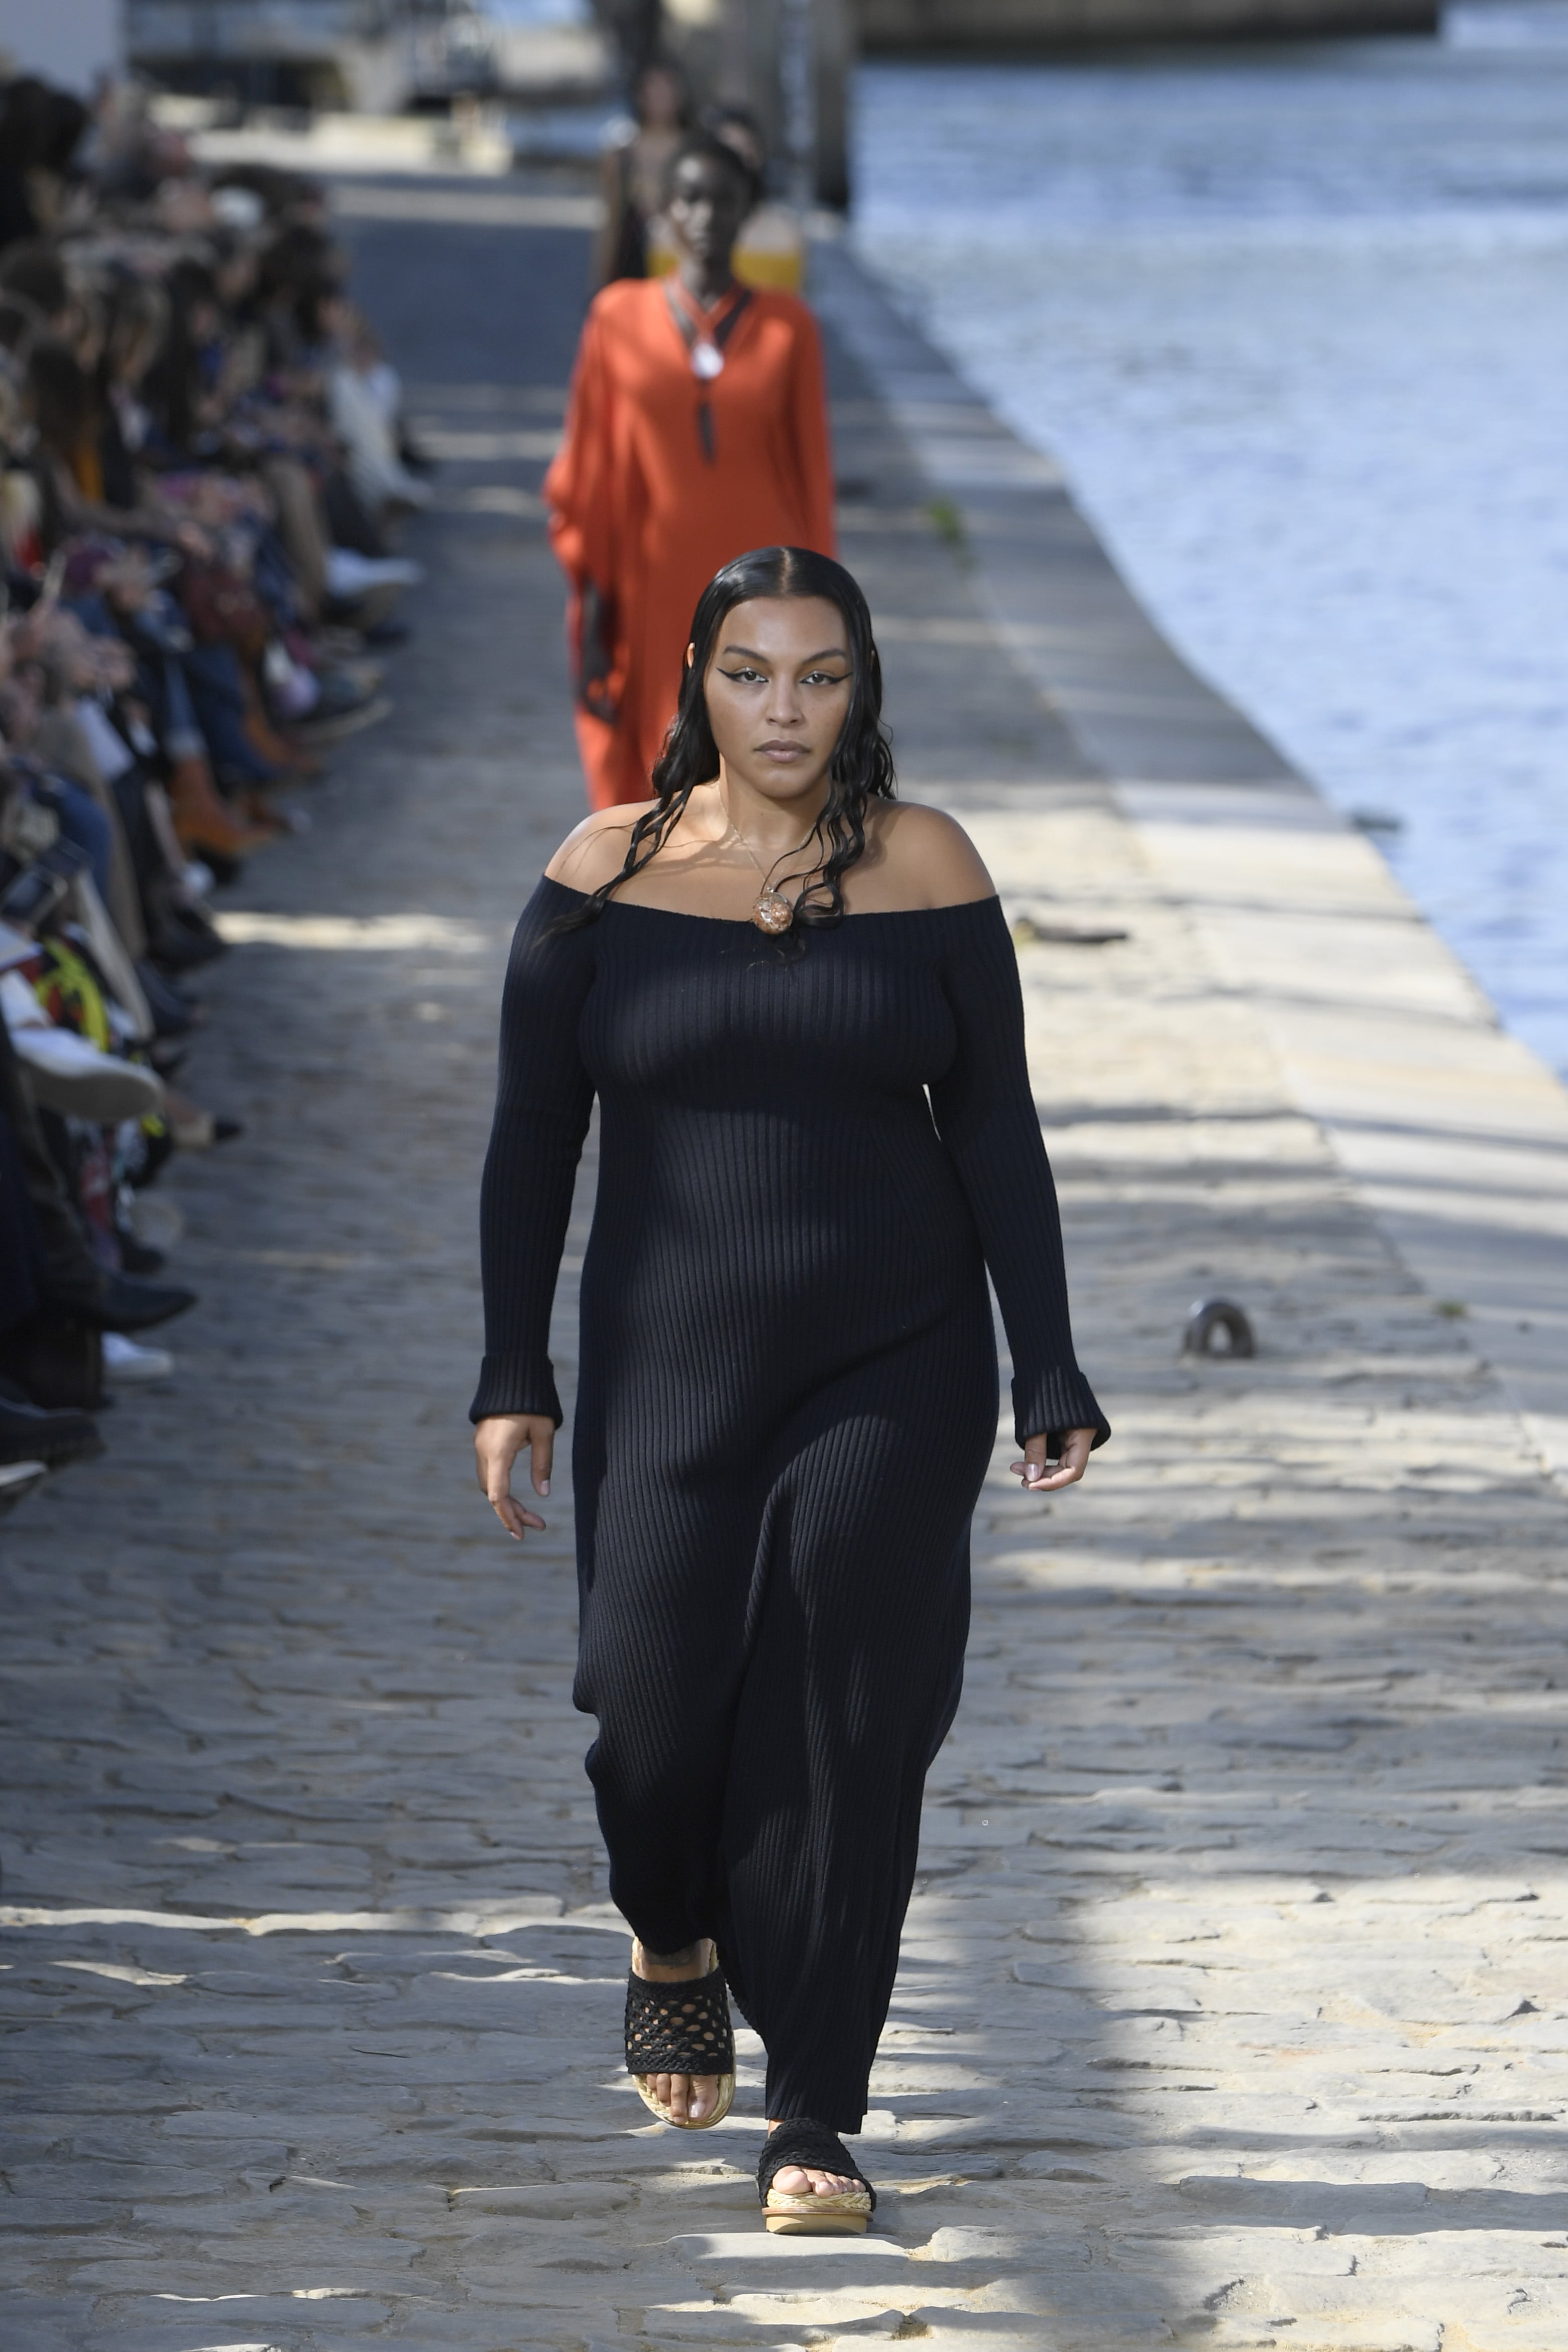 Less Than 1% of Looks at Fashion Month This Year Were Plus-Size